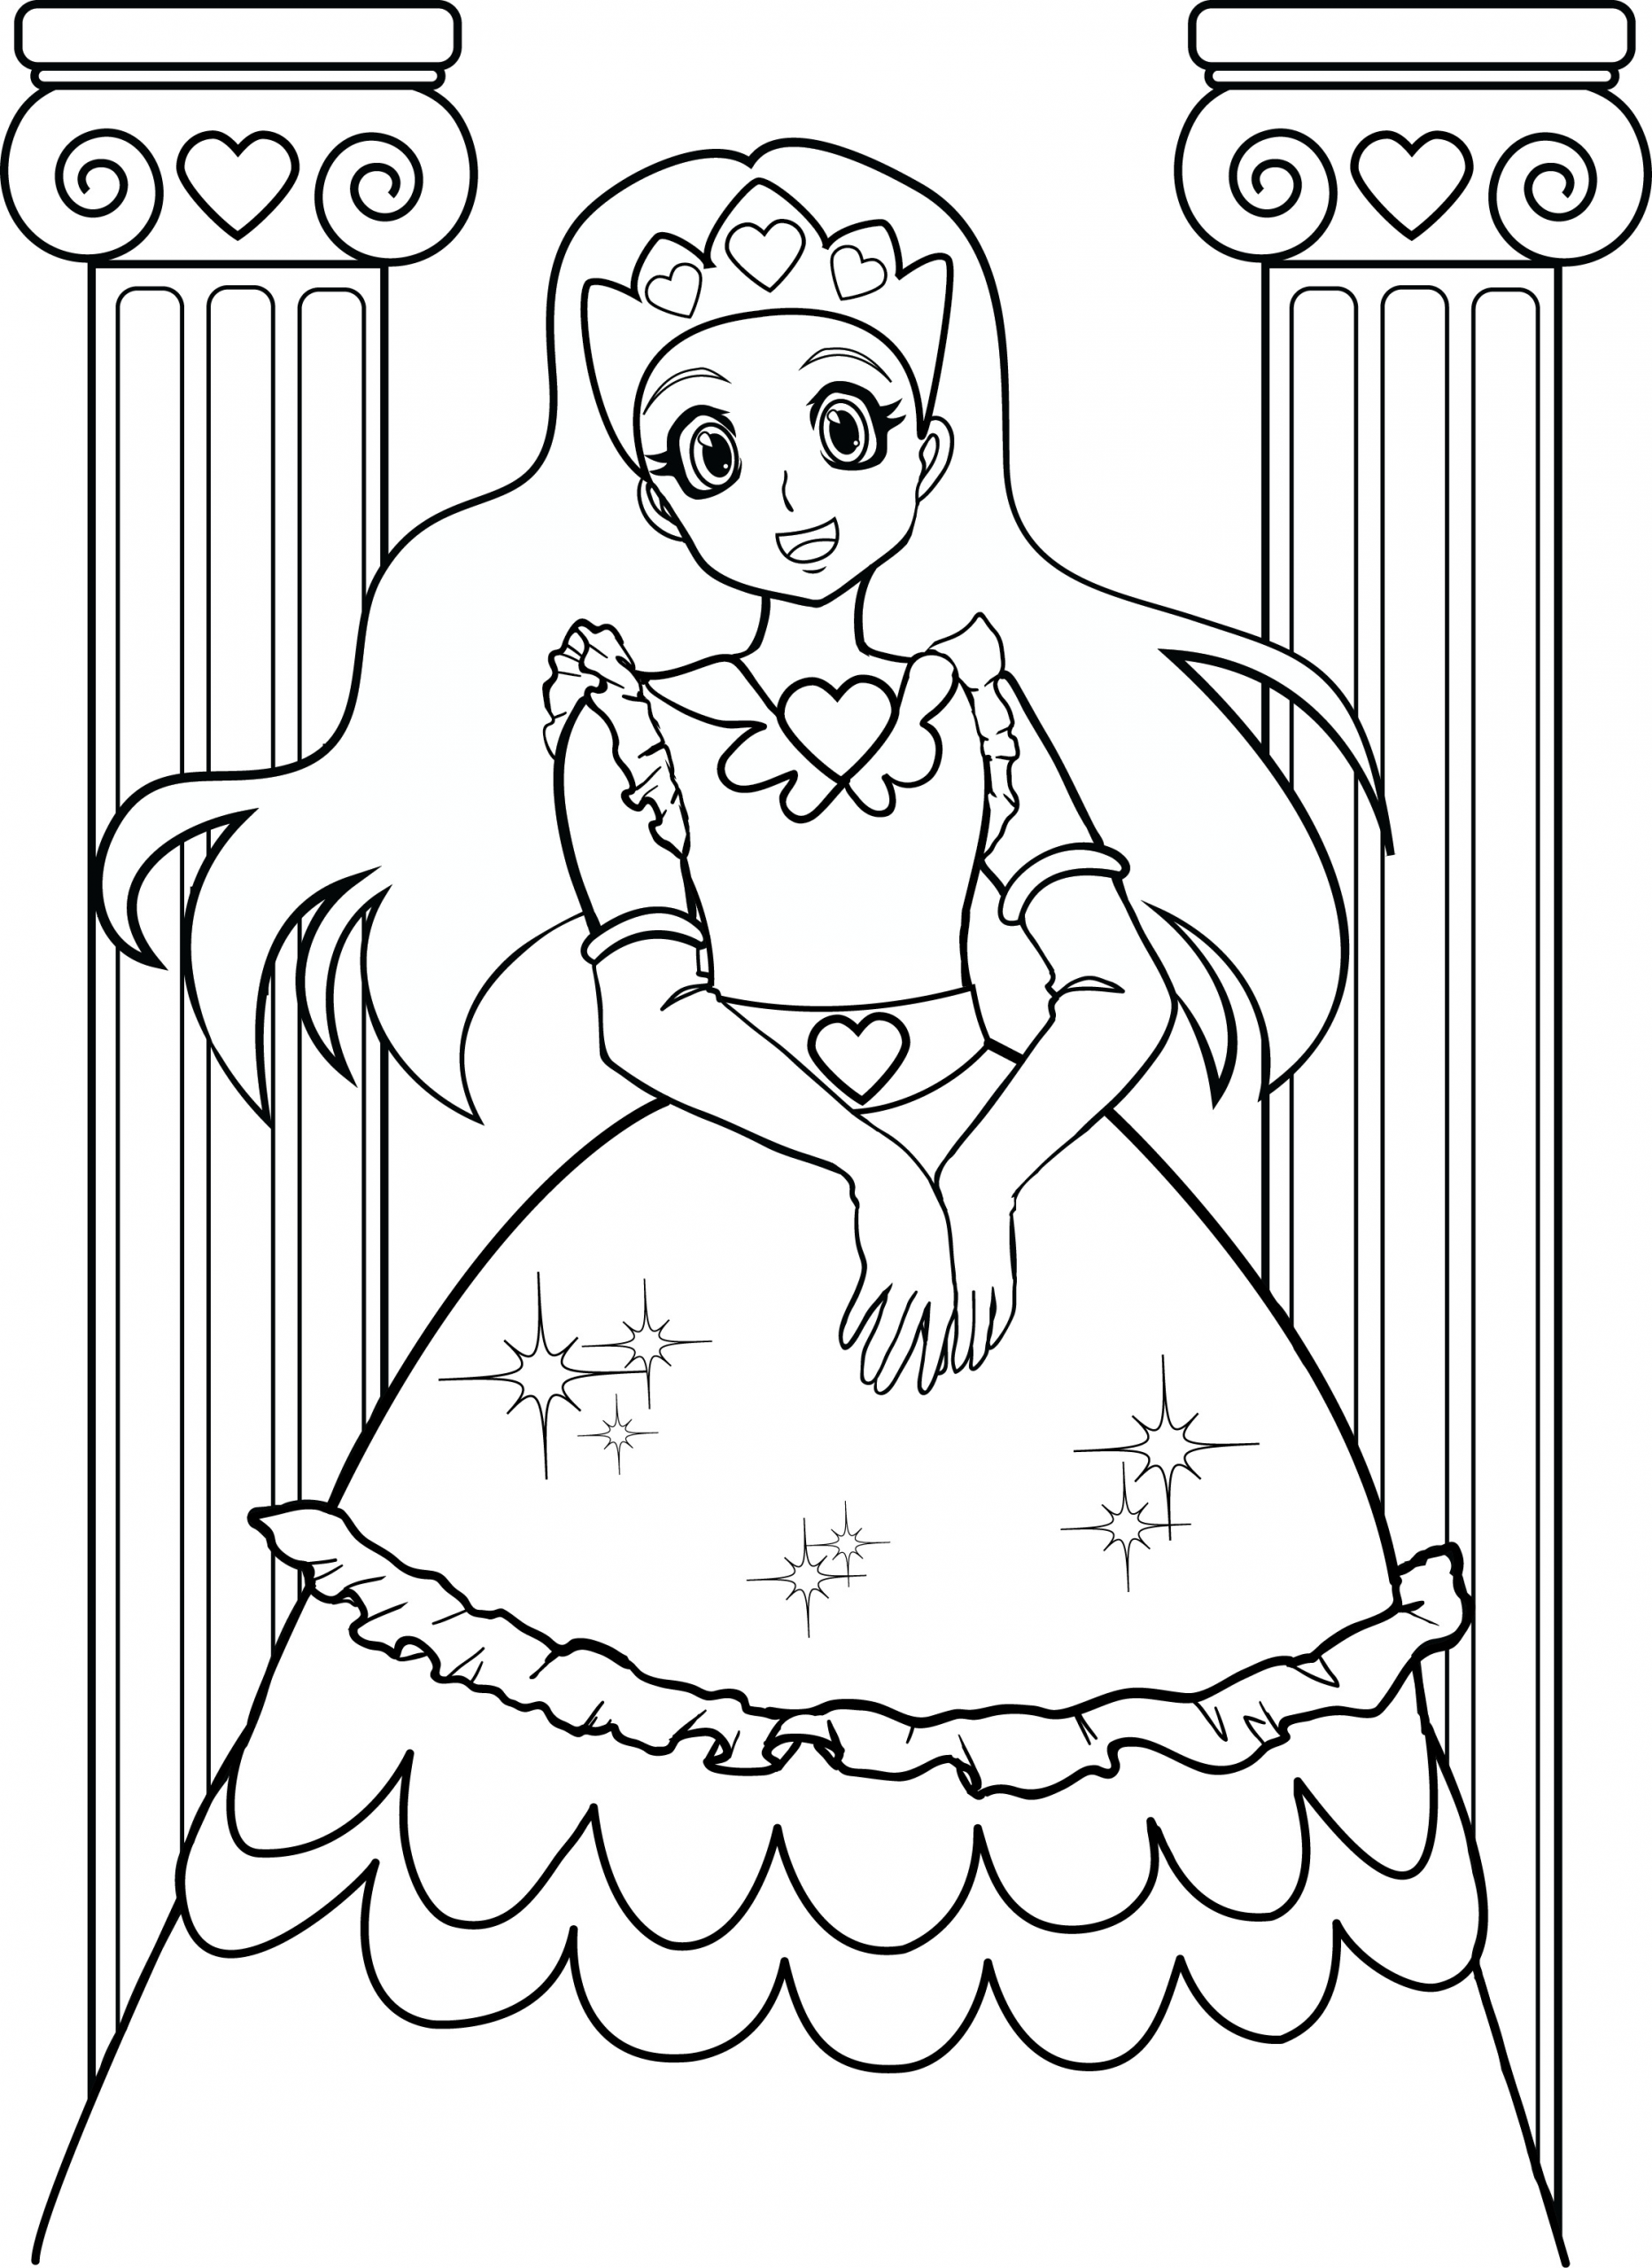 Fun Coloring Pages For Girls
 Coloring Pages For Girls 7